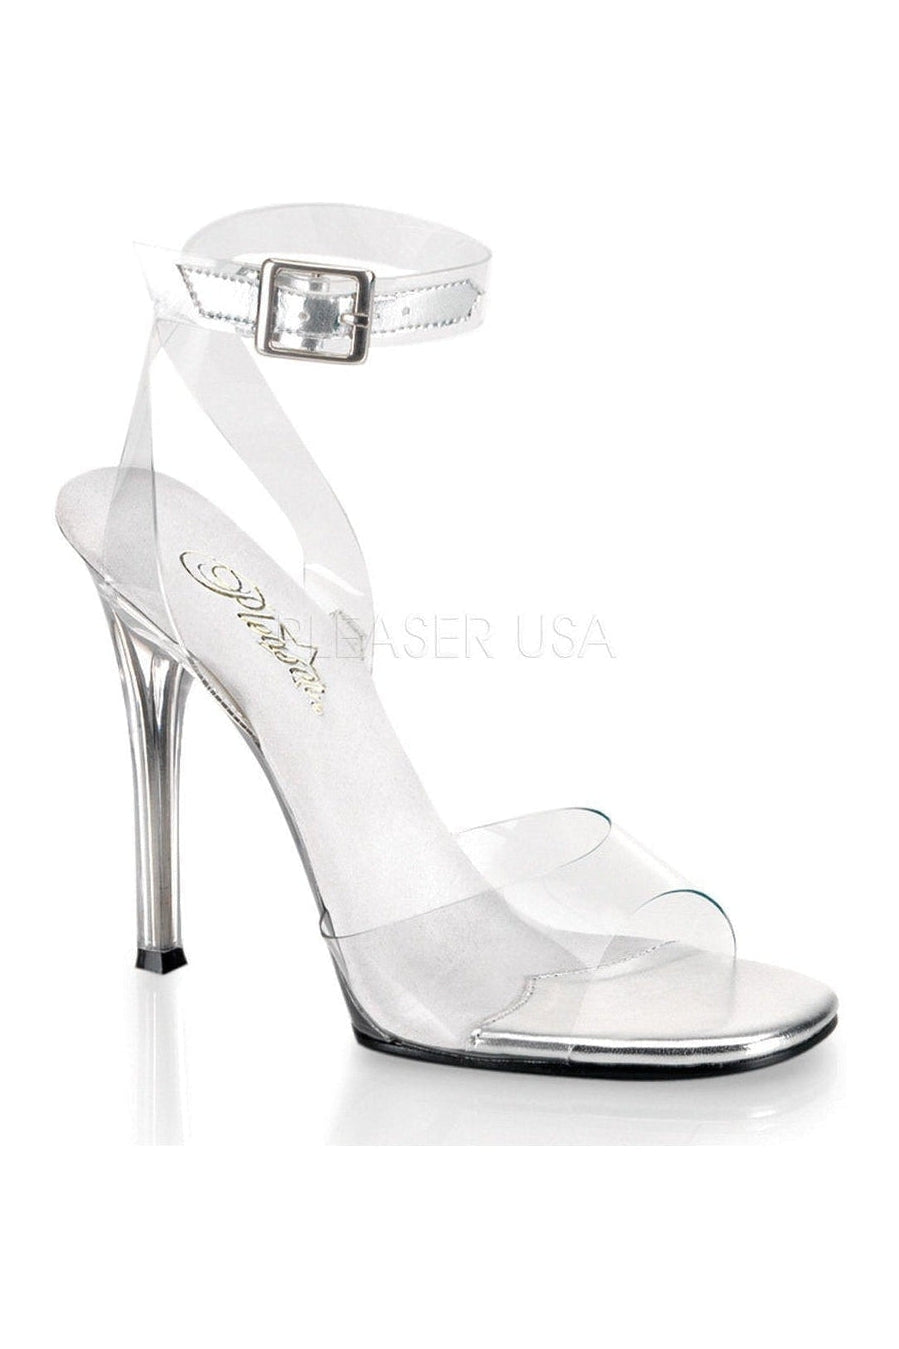 GALA-06 Sandal | Clear Vinyl-Fabulicious-Clear-Sandals-SEXYSHOES.COM